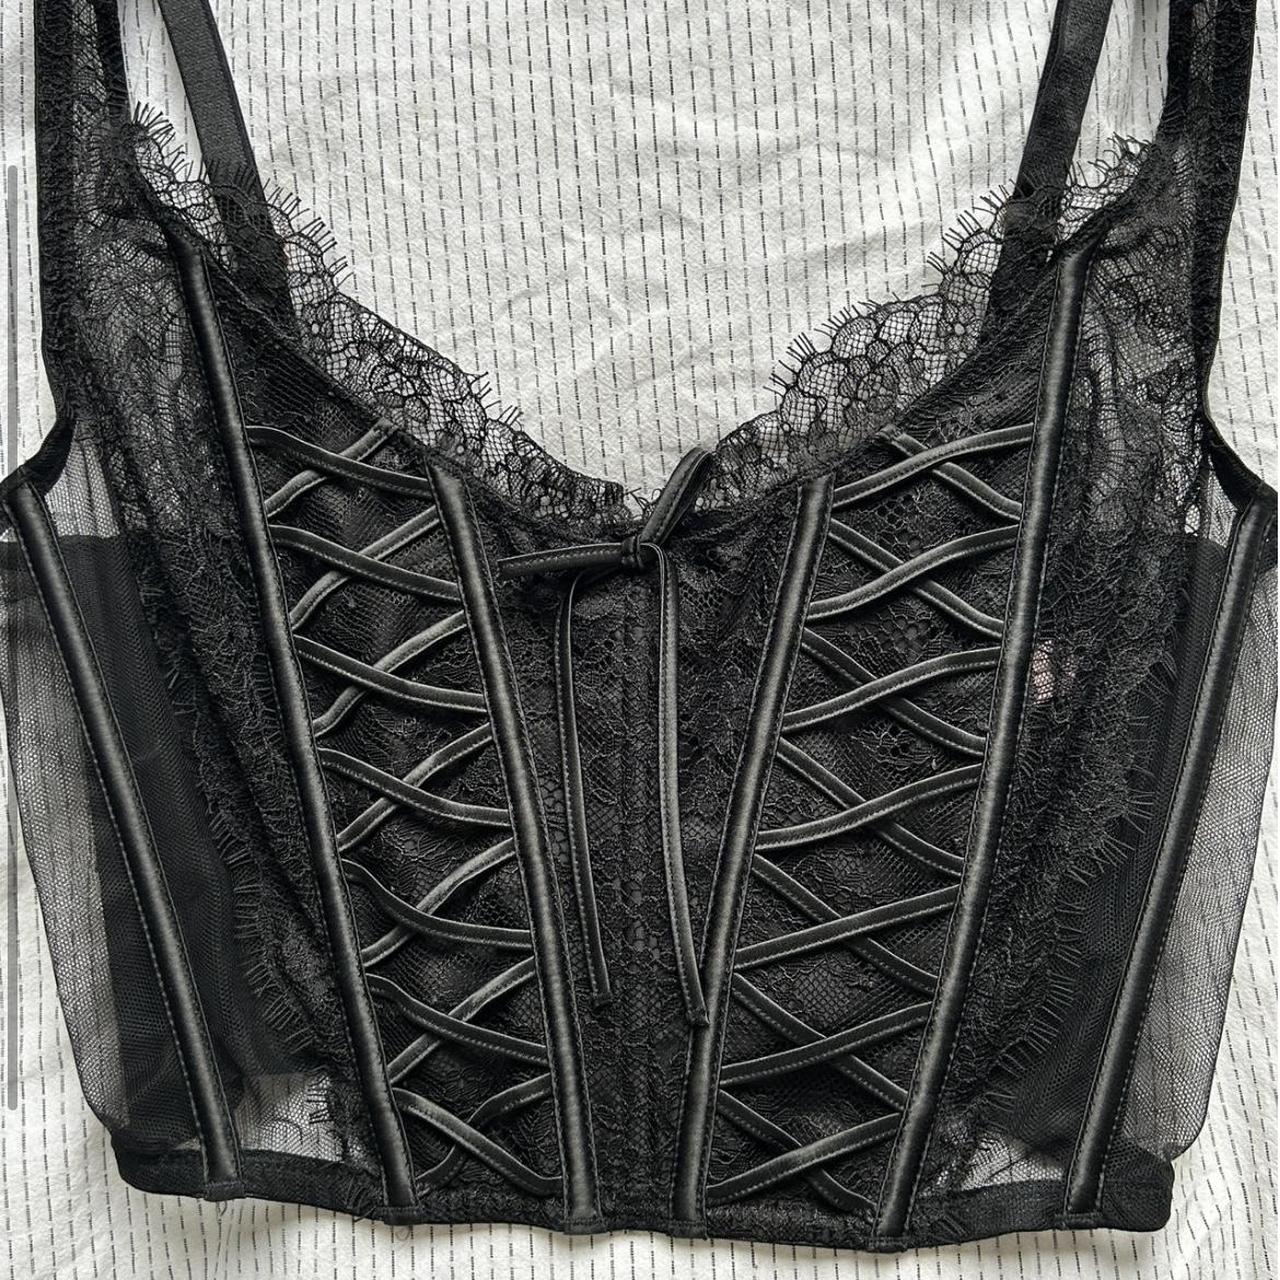 Buy Victoria's Secret Lace Unlined Non Wired Corset Bra Top from